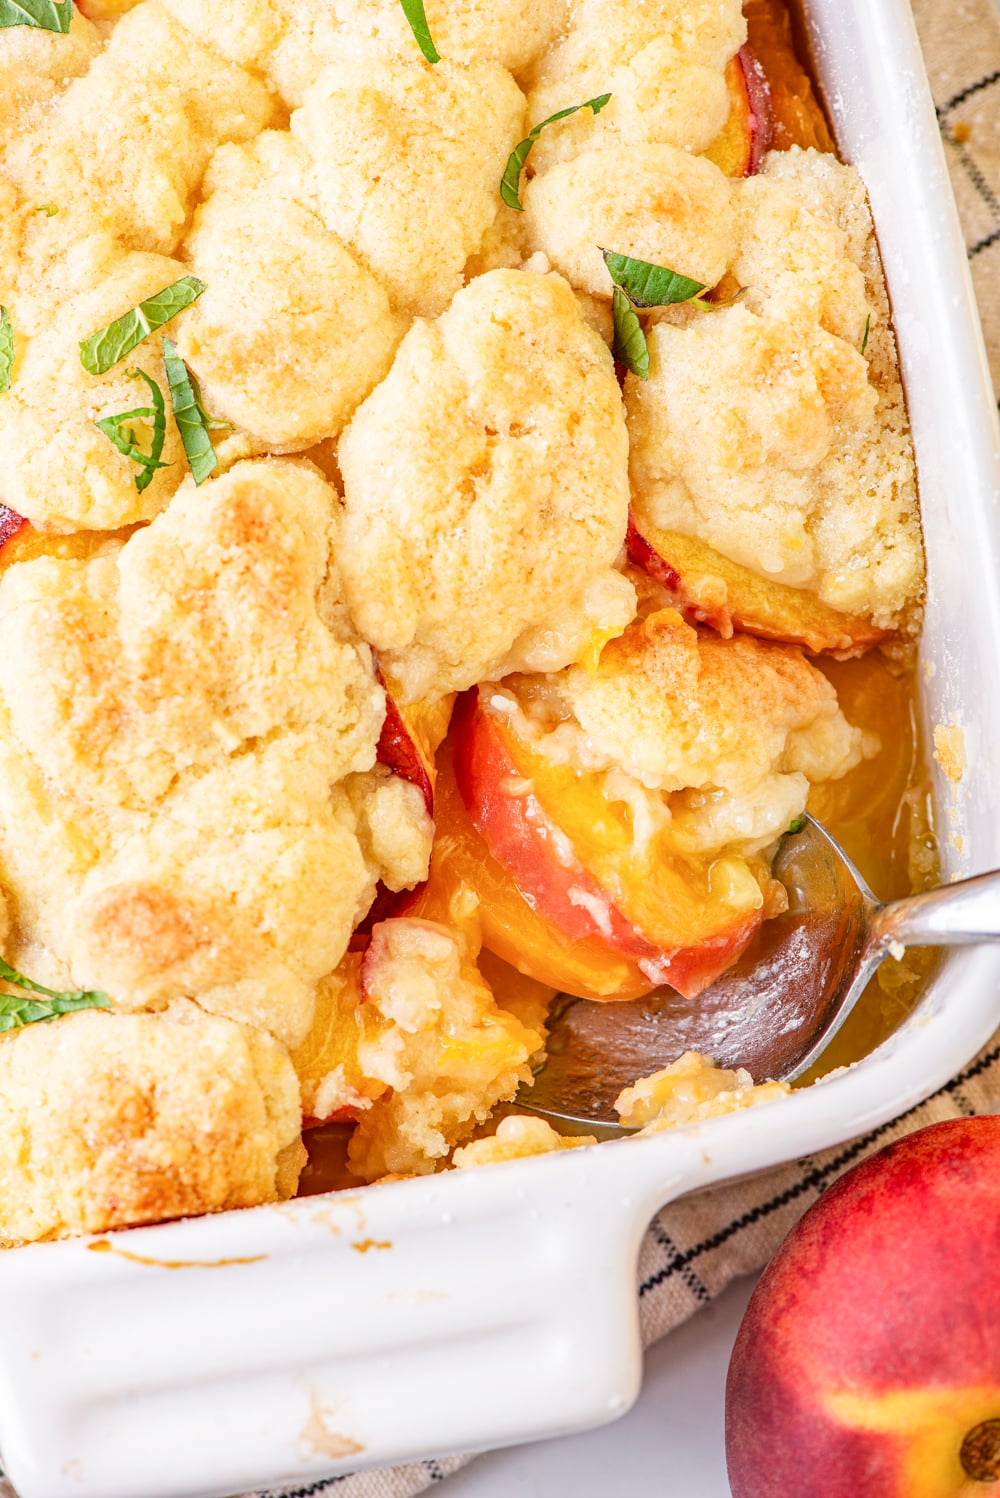 The corner of a white baking dish filled with vegan peach cobbler. There is a metal spoon head scooping the peach cobbler at the edge of the baking dish. A peach is right in front of the corner of the dish.